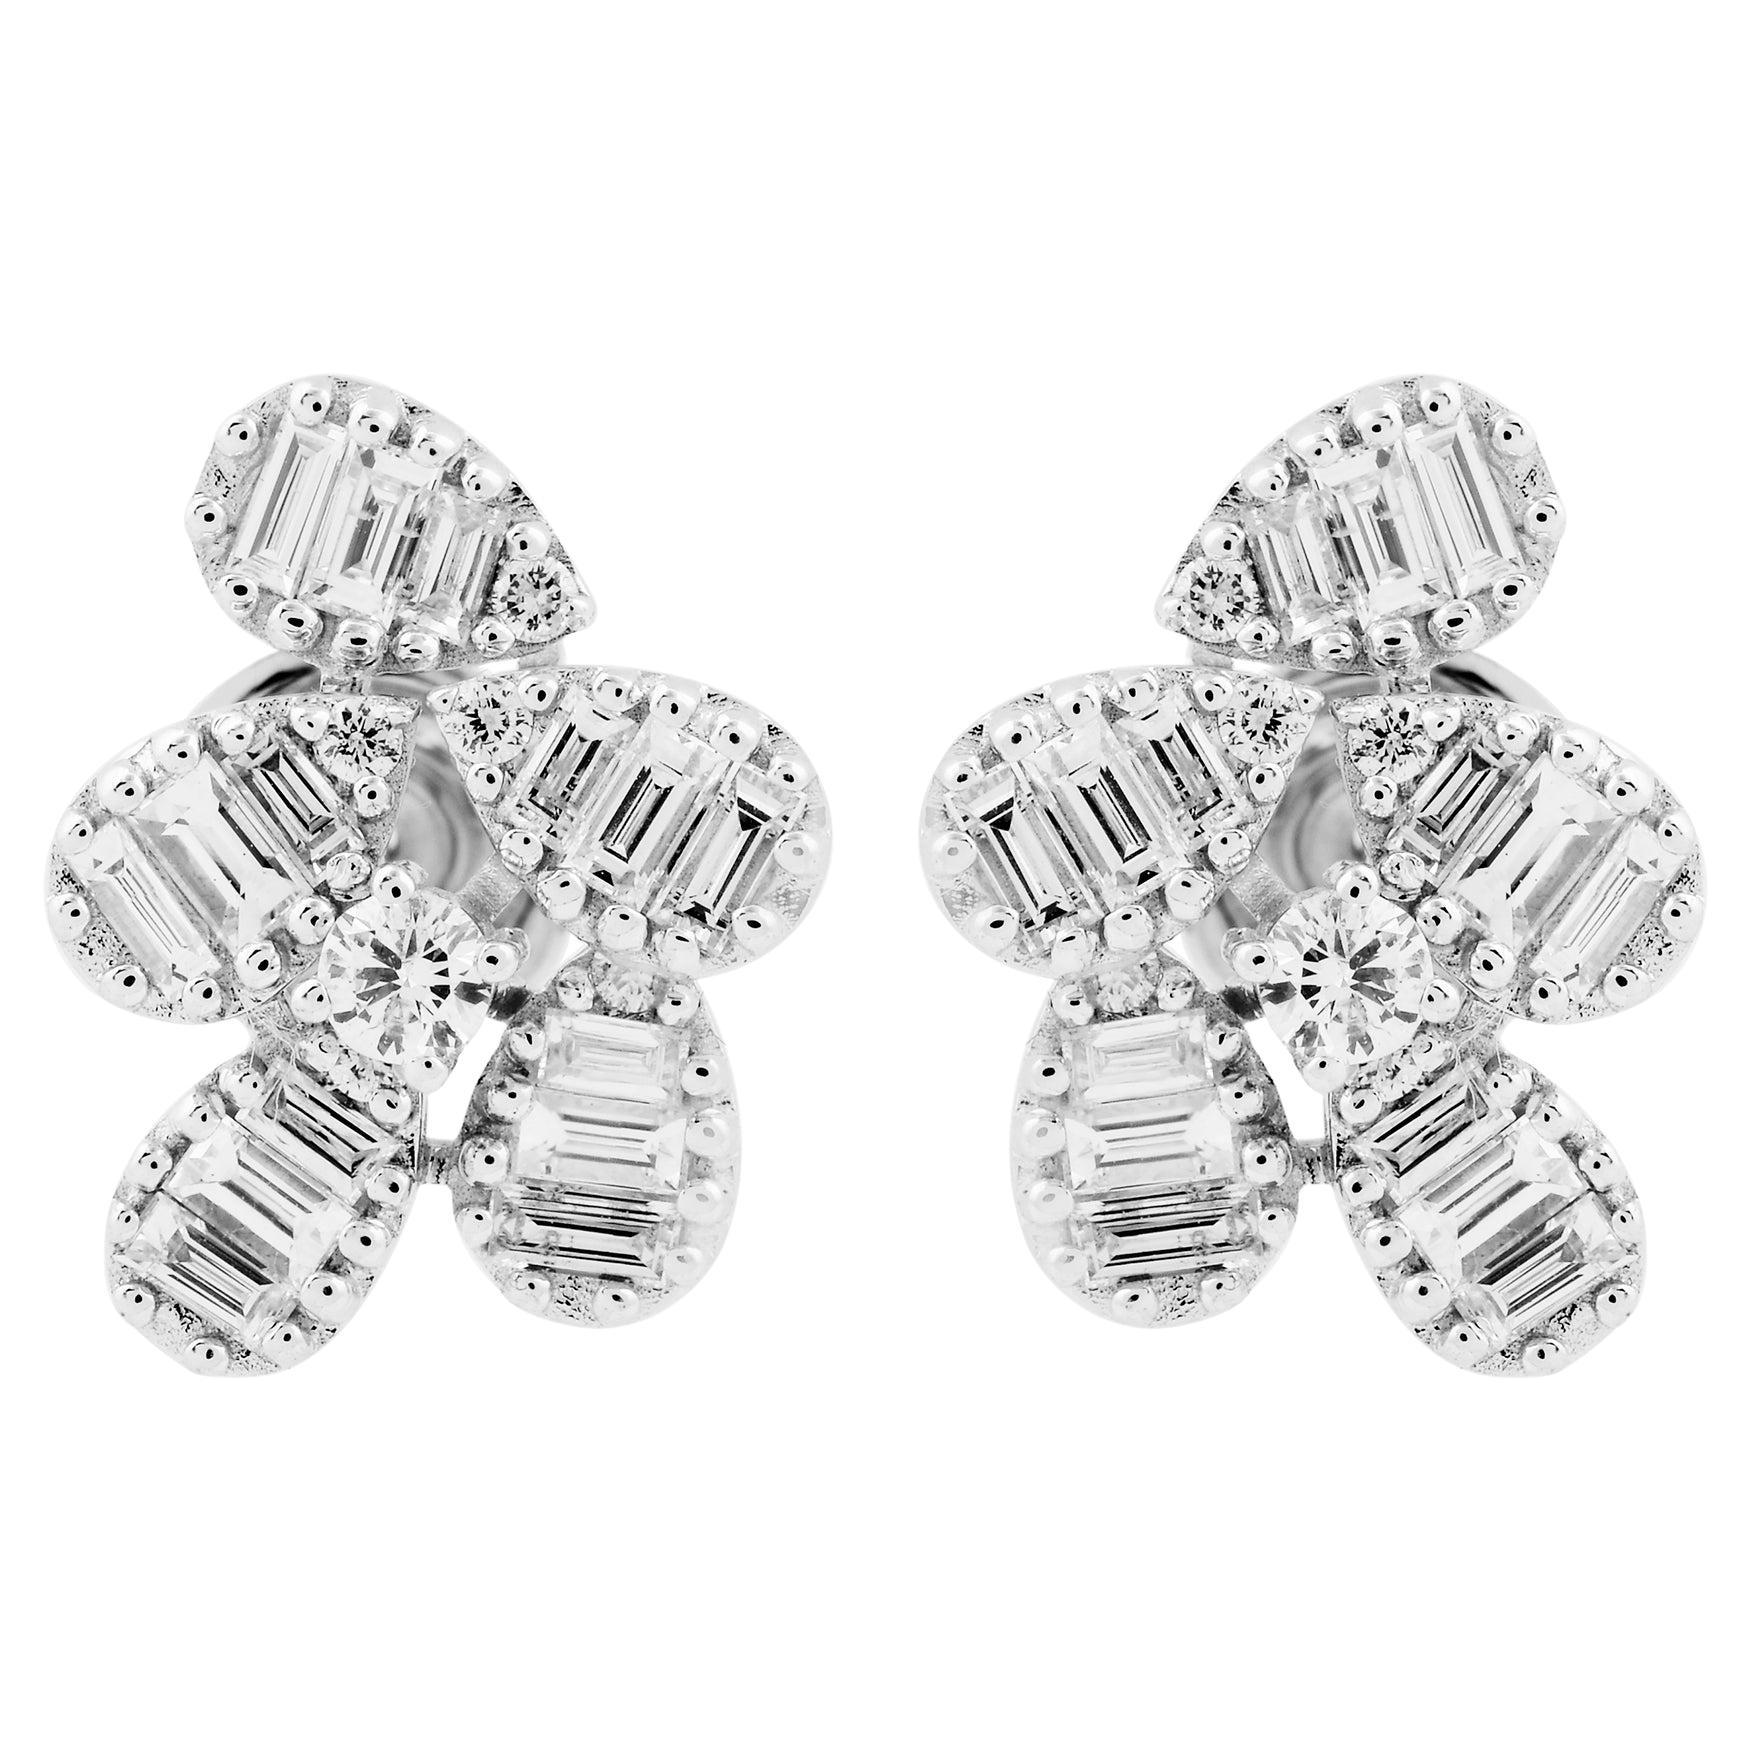 Clarity SI Color HI Baguette Diamond Stud Ears Solid 14k White Gold Jewelry